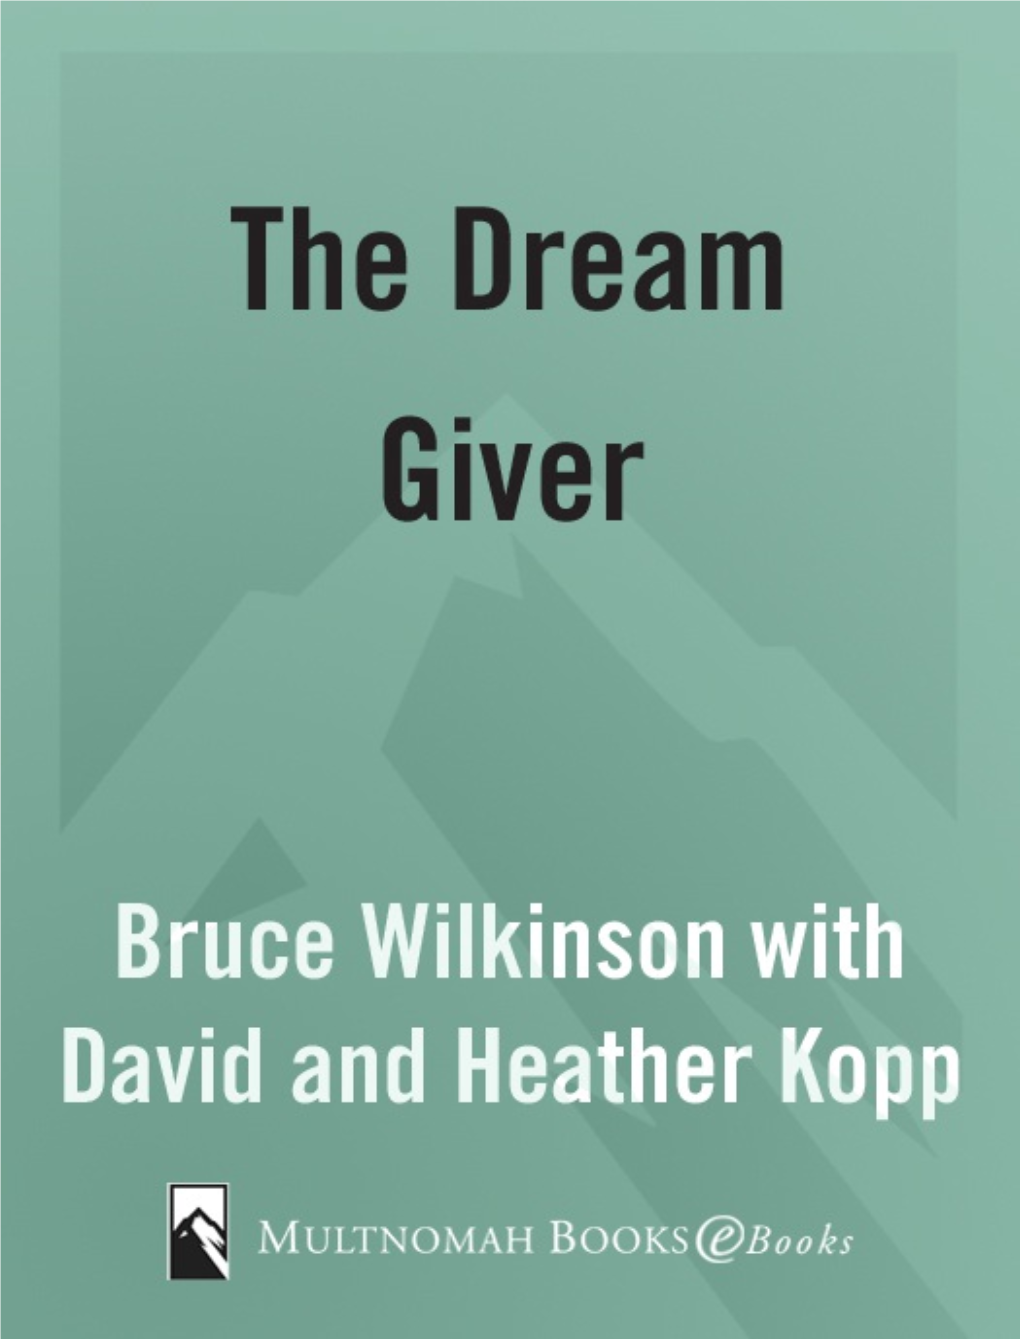 The Dream Giver